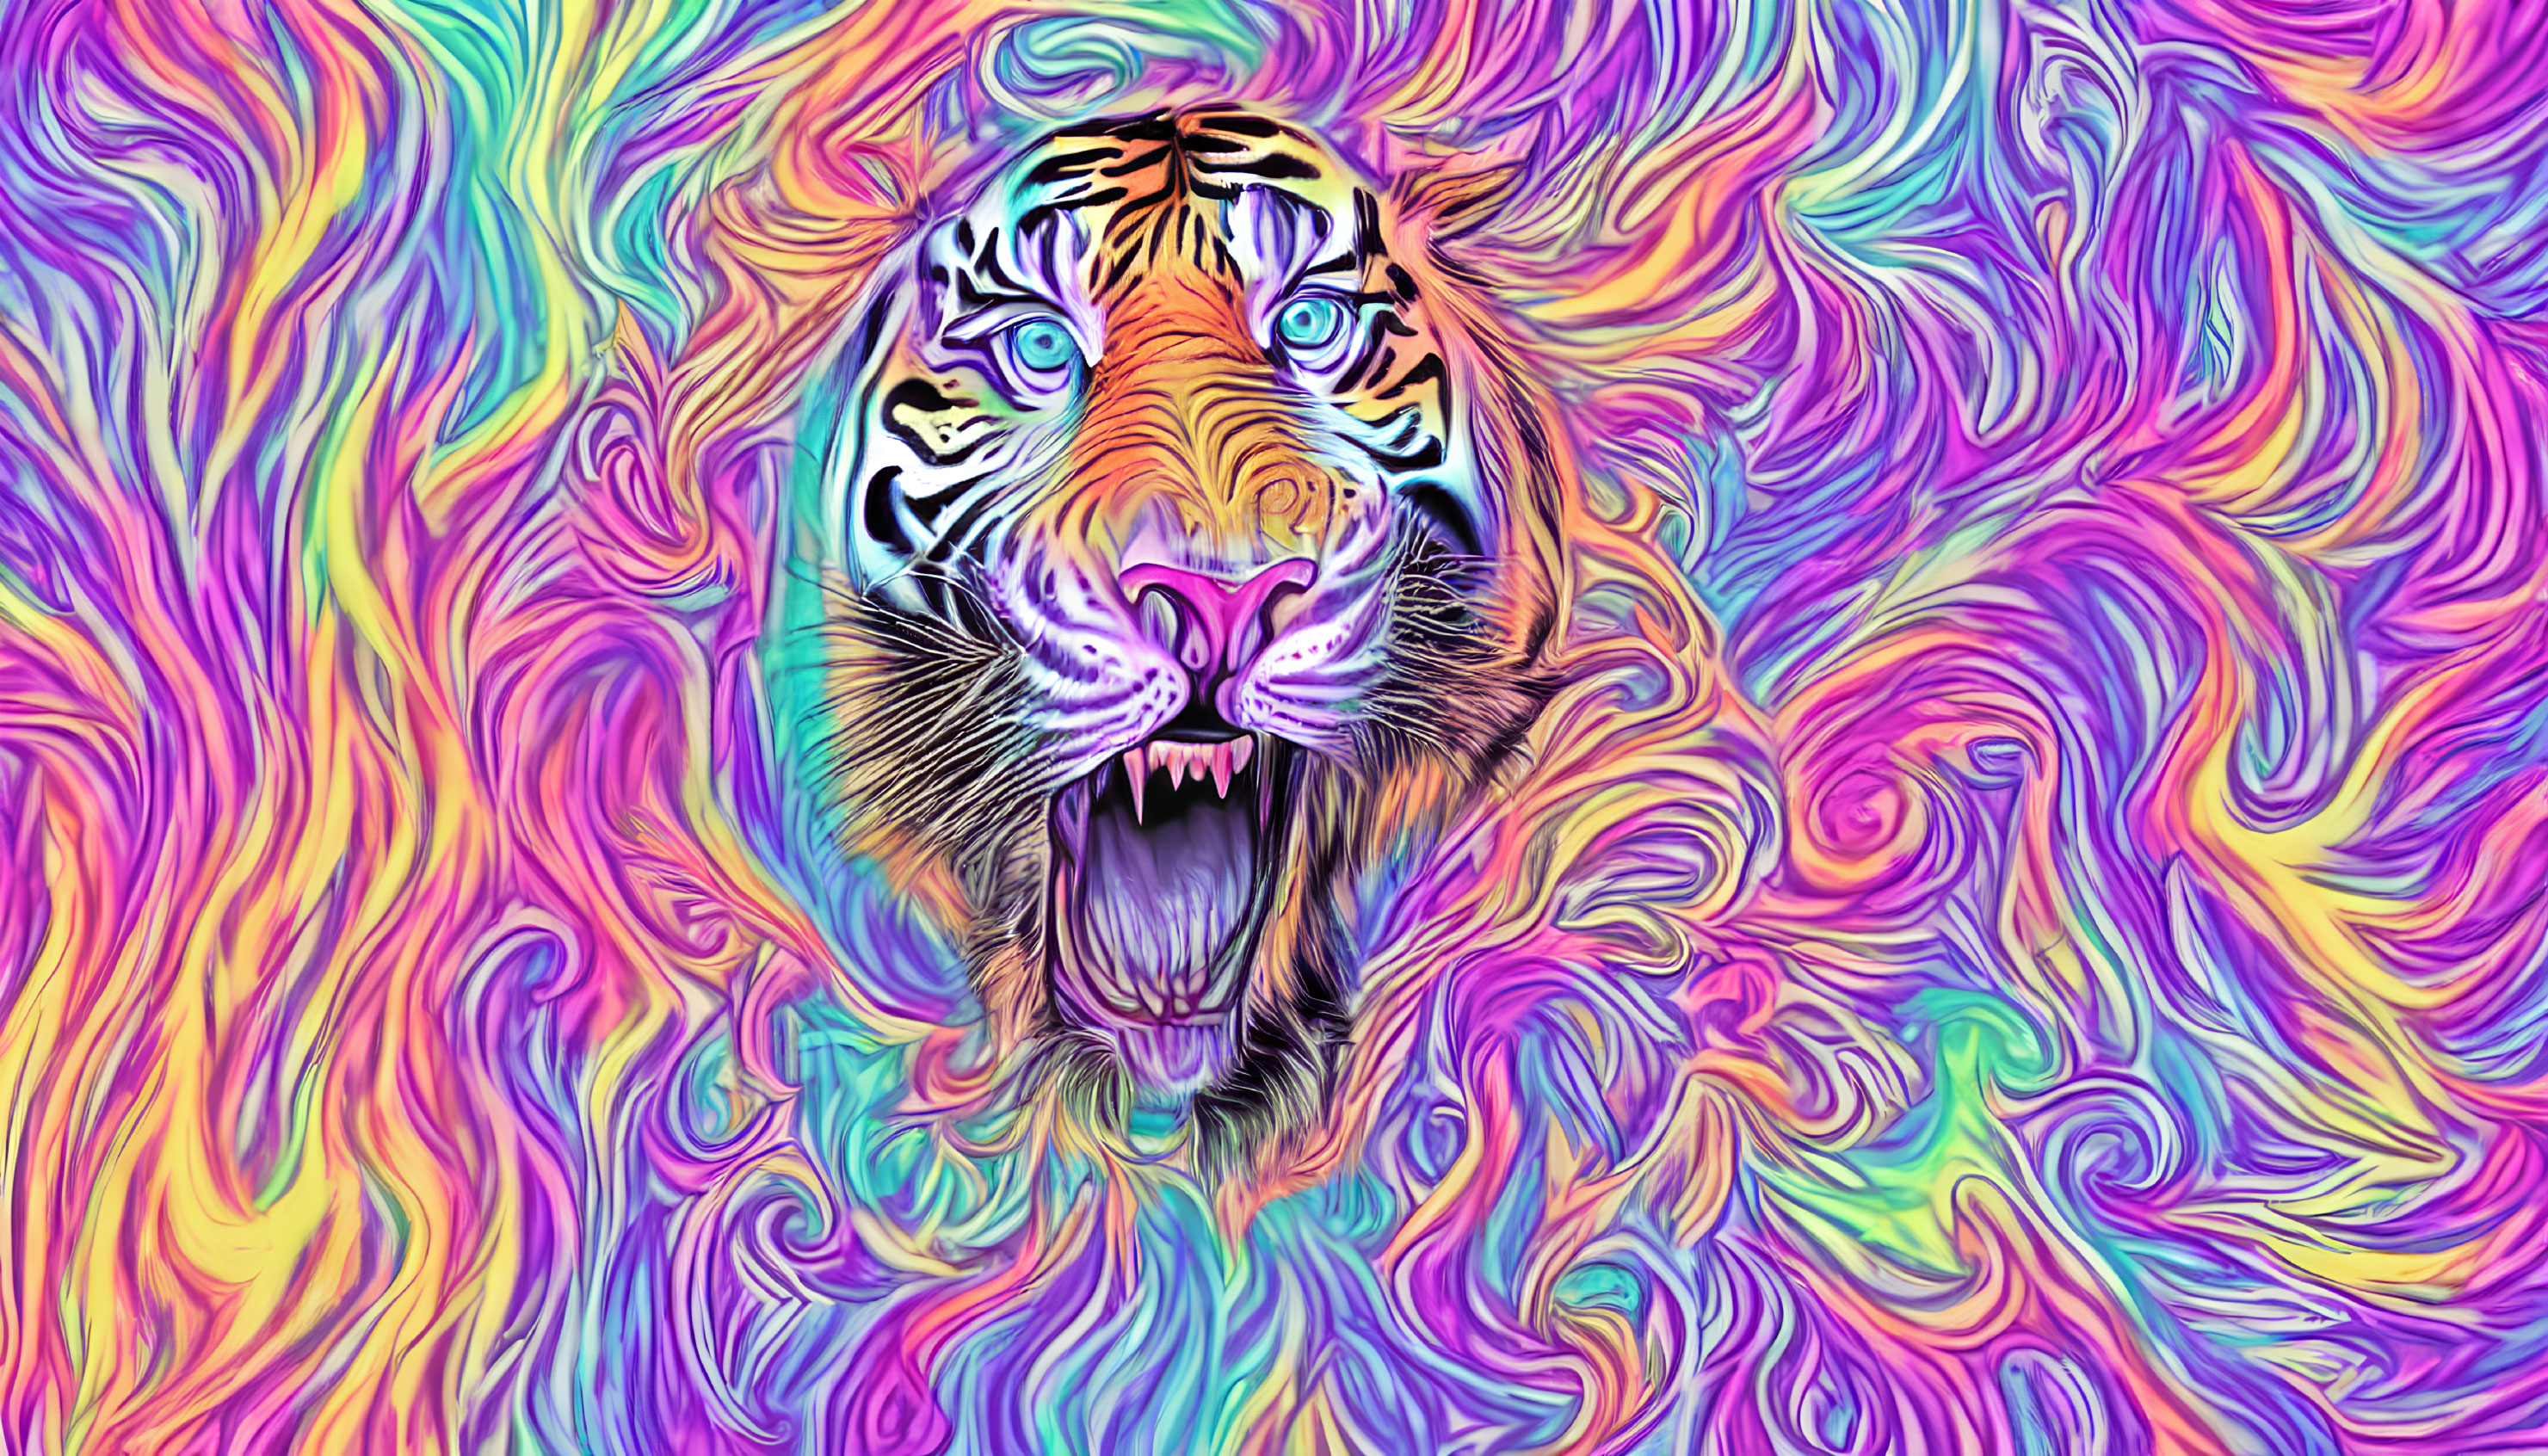 Colorful Tiger Face Painting with Psychedelic Abstract Patterns